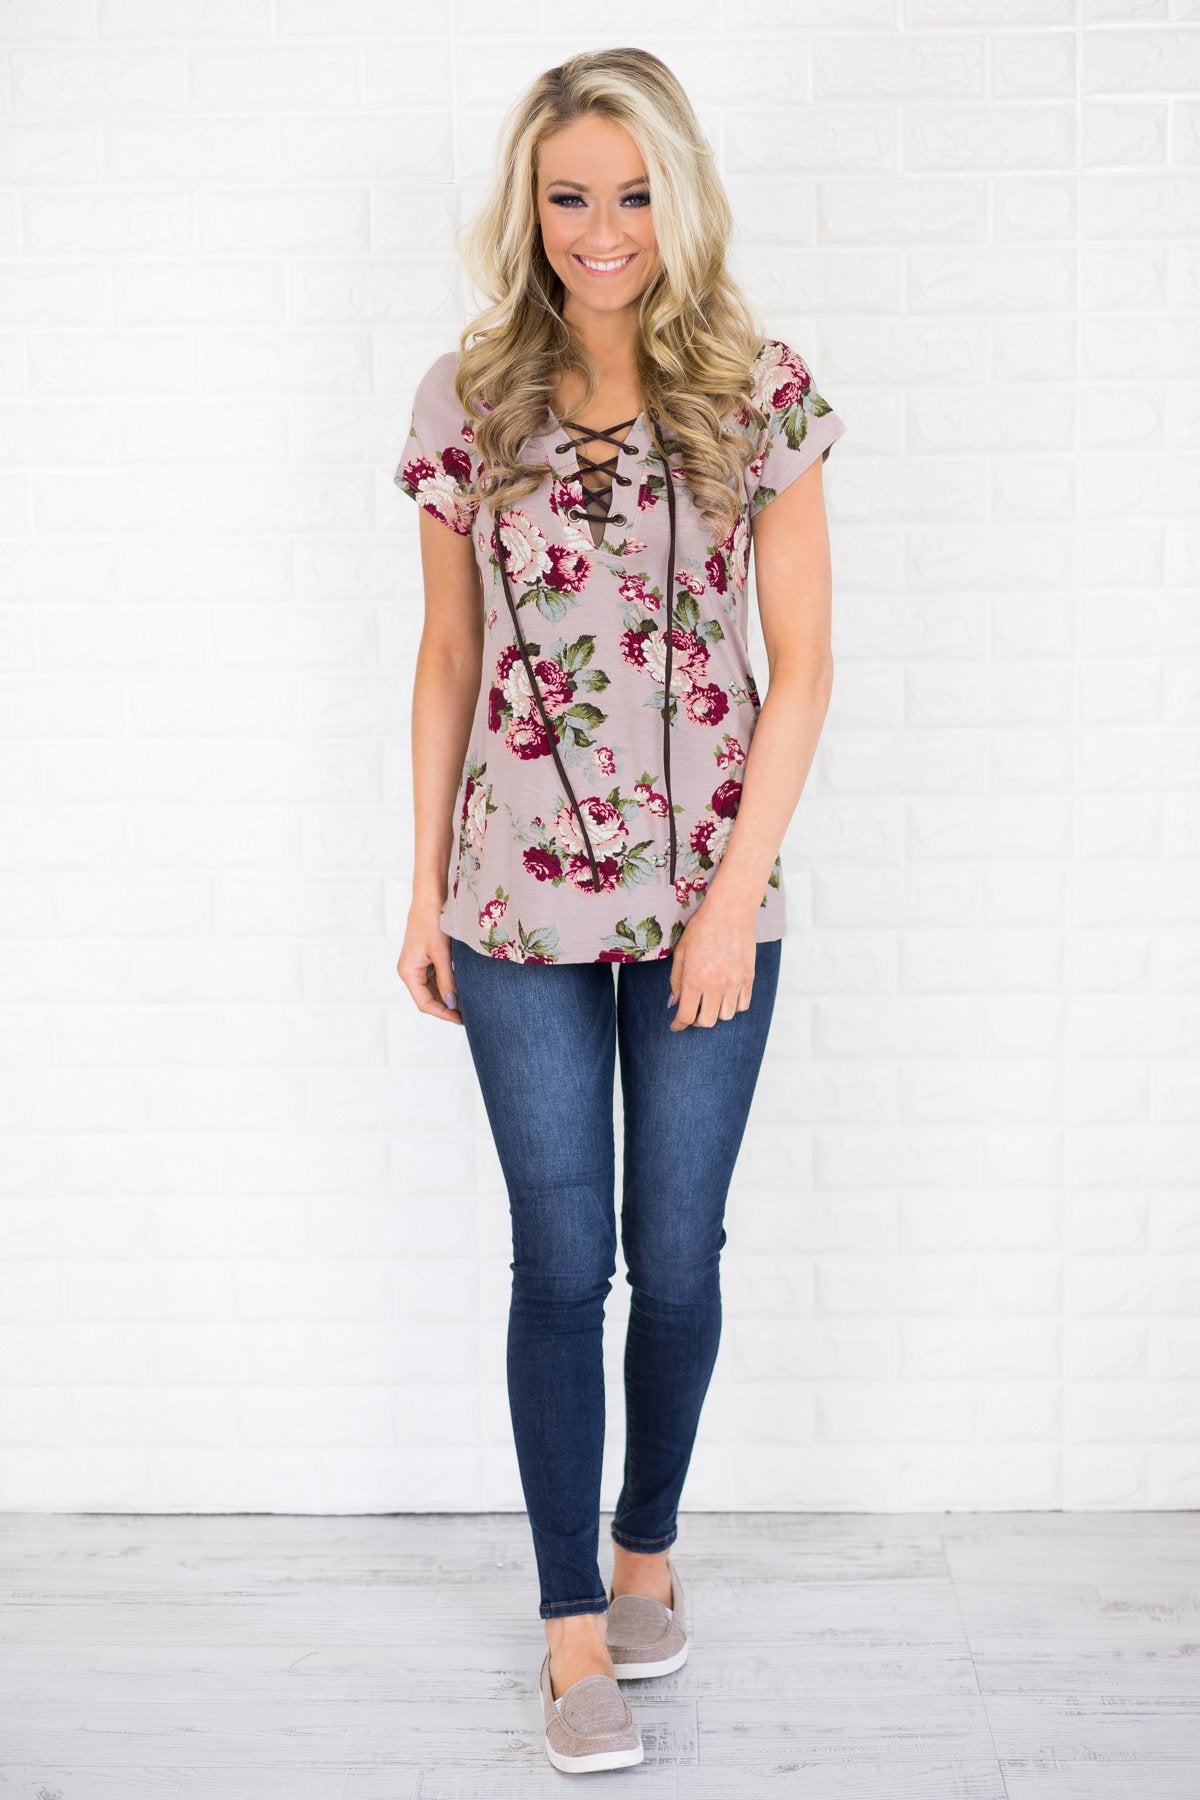 Lace Up Floral Top